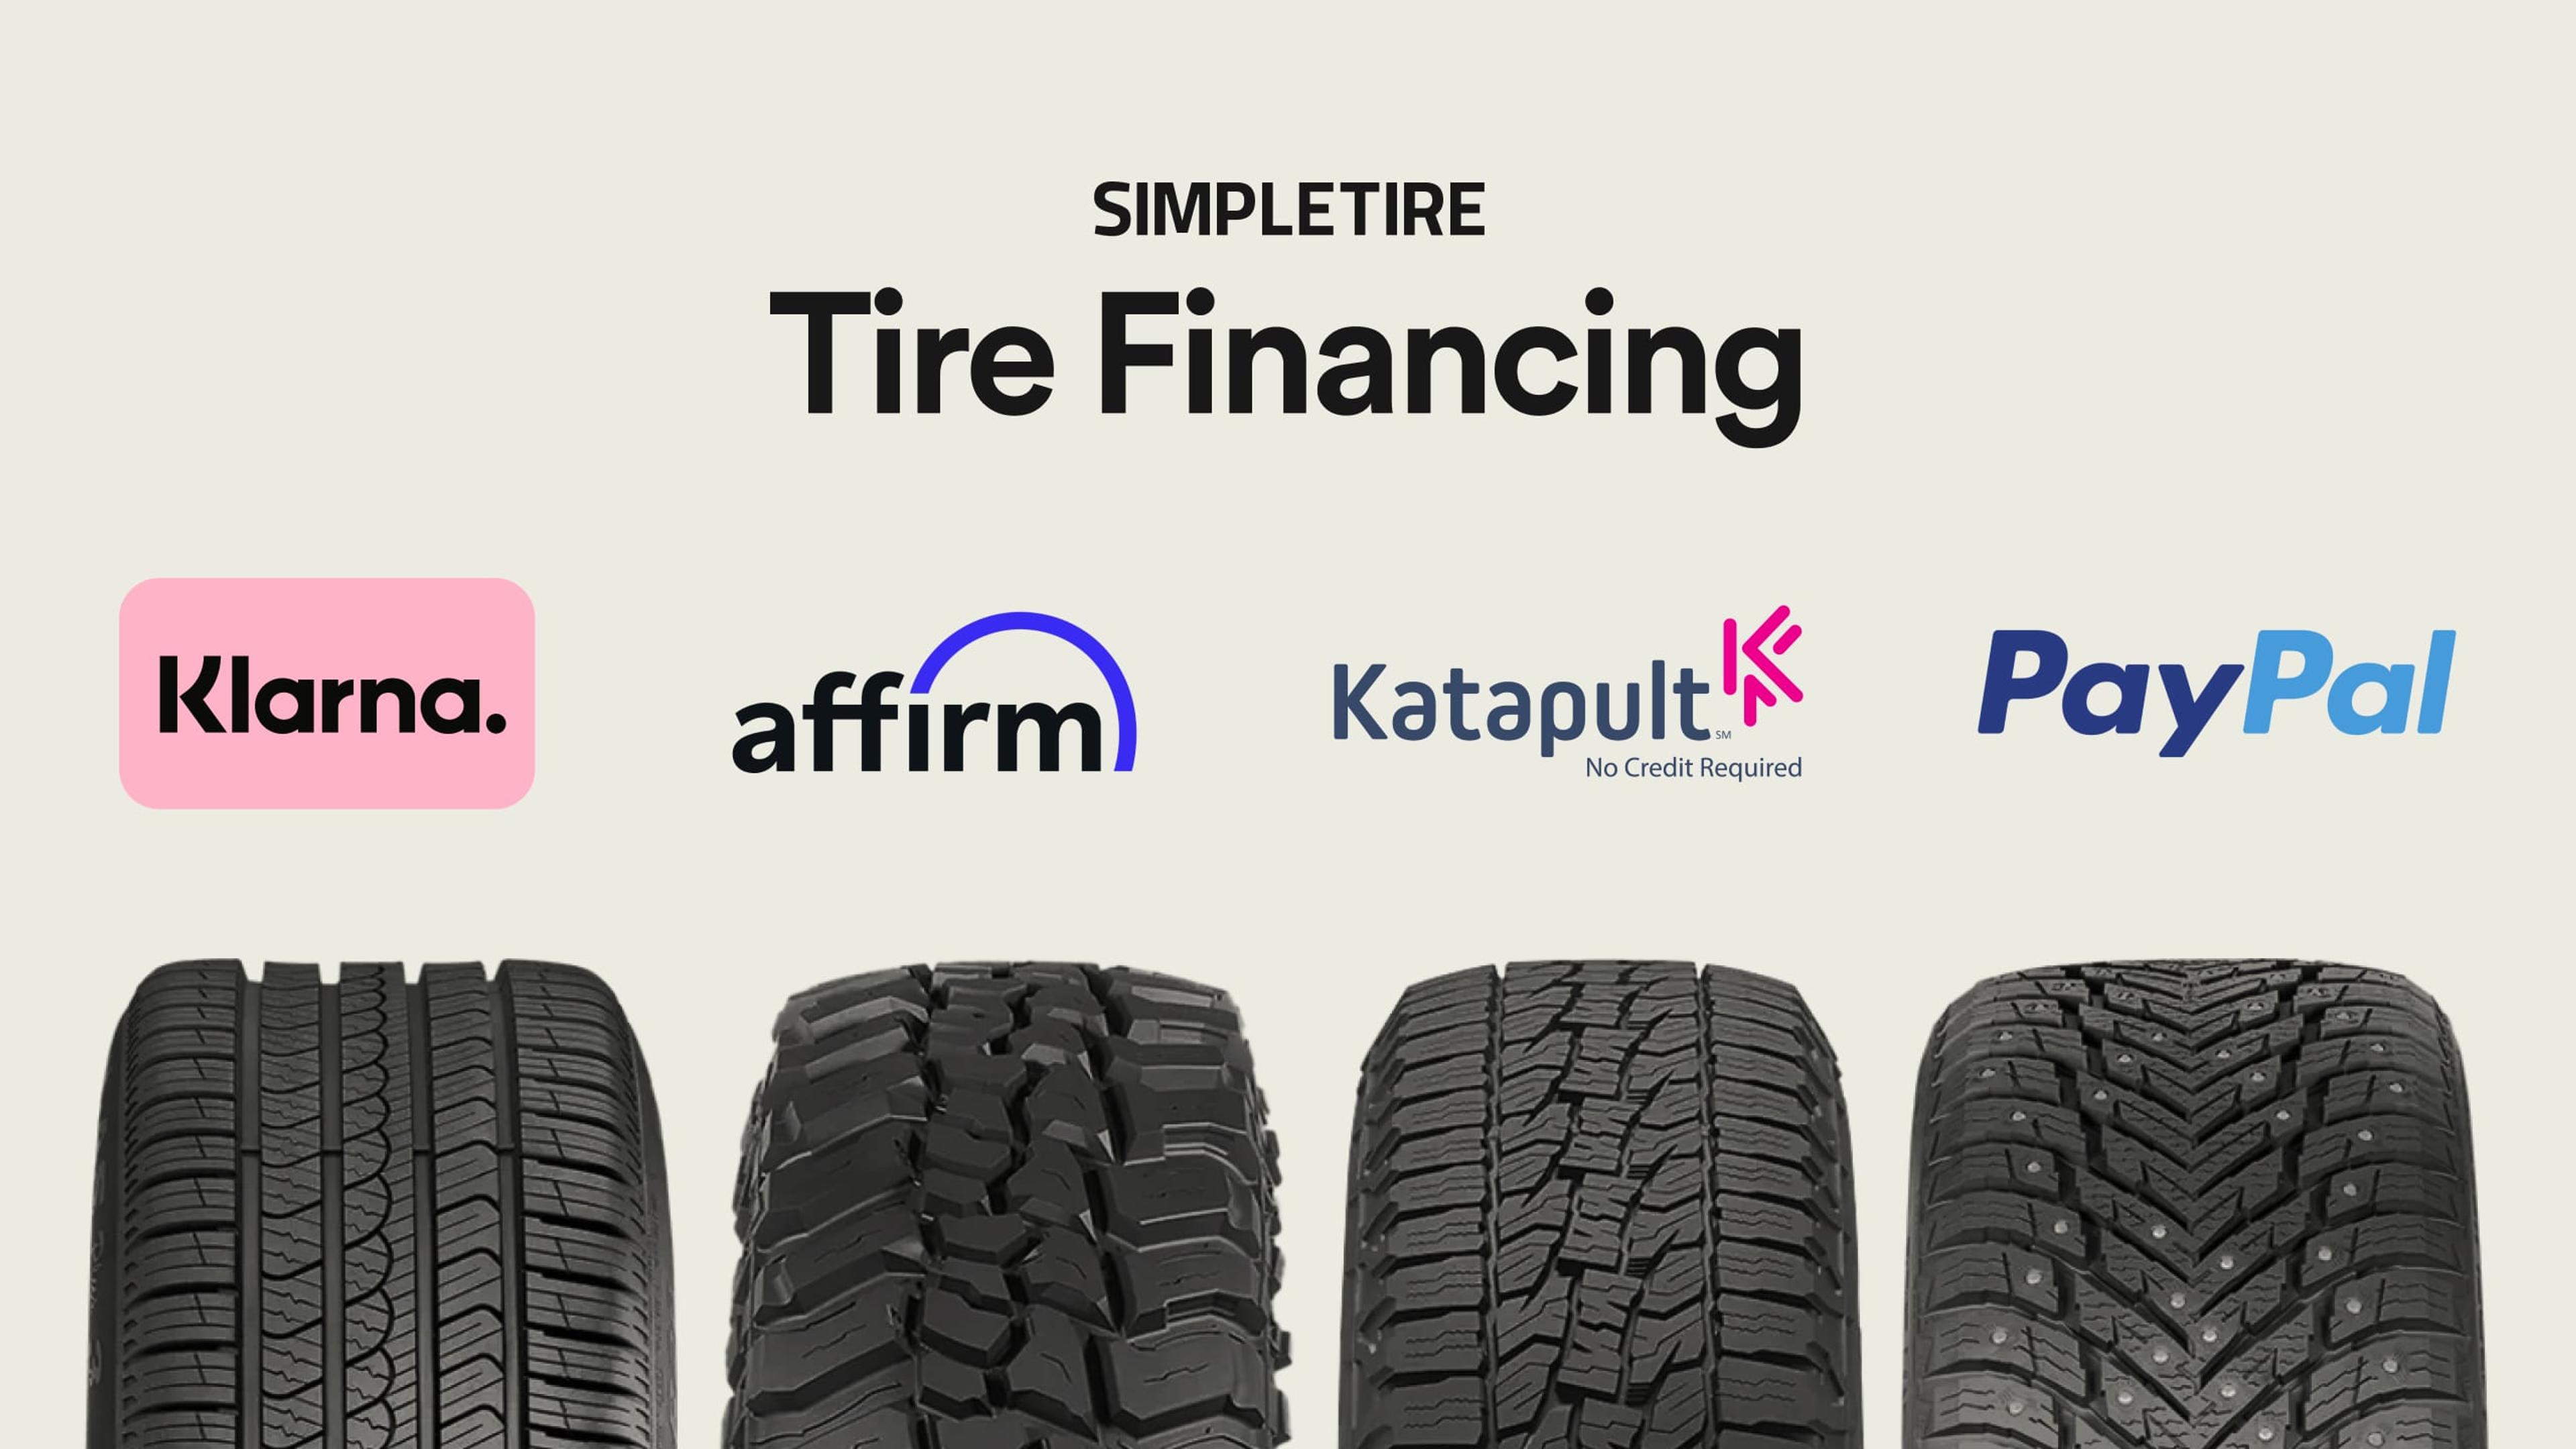 tire financing options offered by simpletire